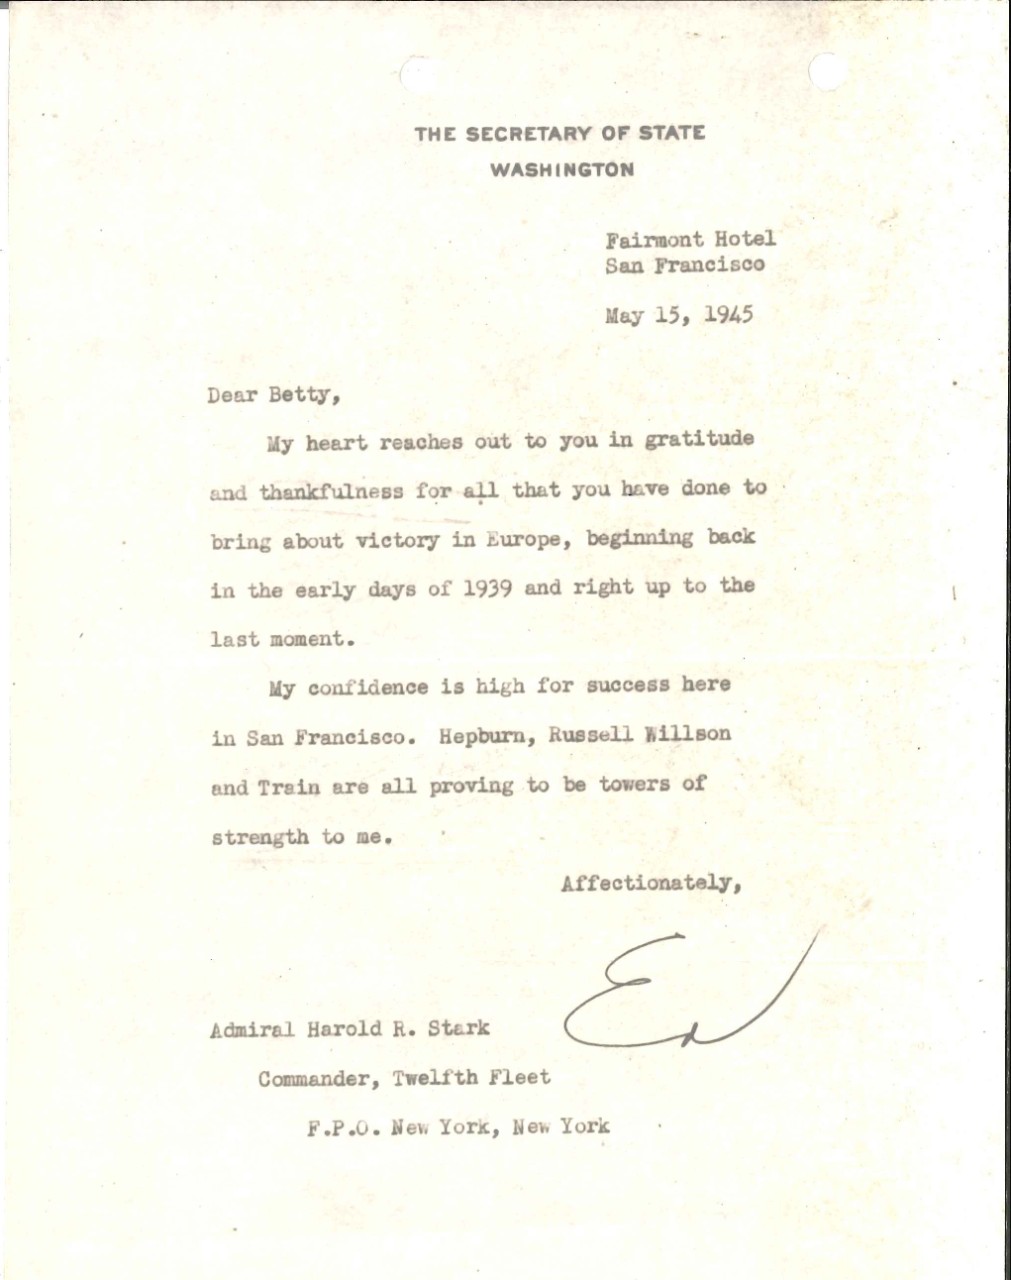 Letter from Secretary of State Edward Stettinius to Admiral Harold "Betty" Stark, May 15, 1945